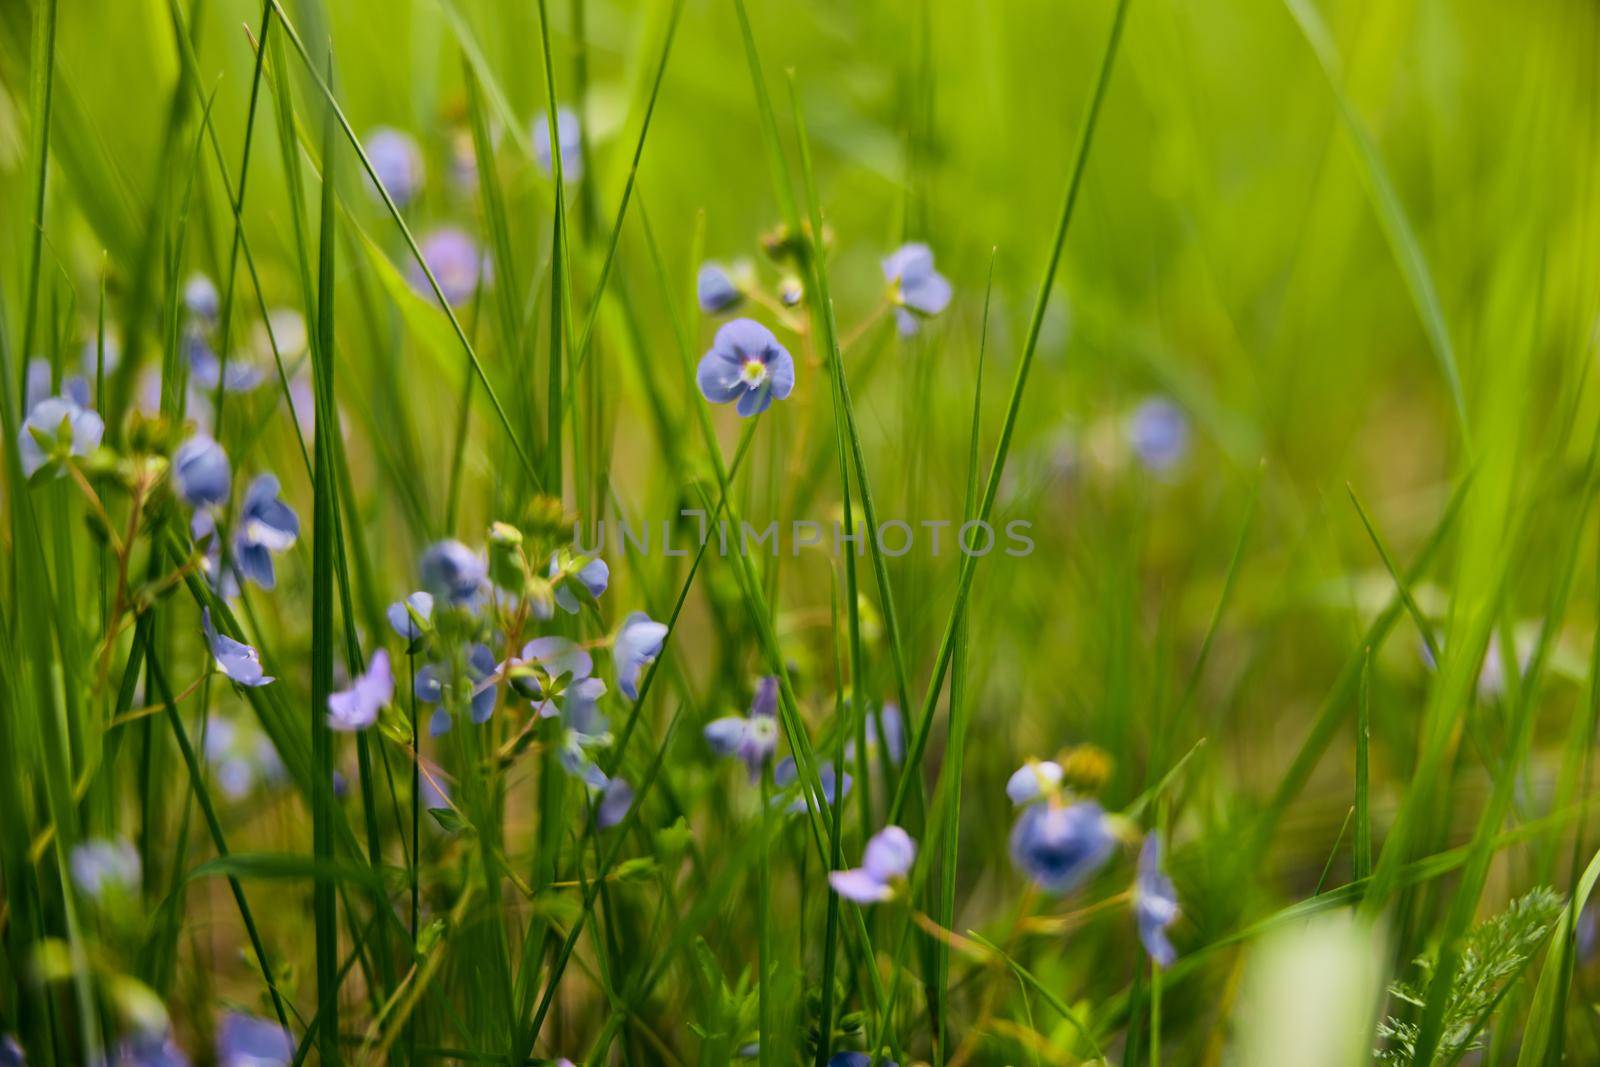 photo of small blue wildflowers in the grass in the sun. Macro shooting by Vichizh